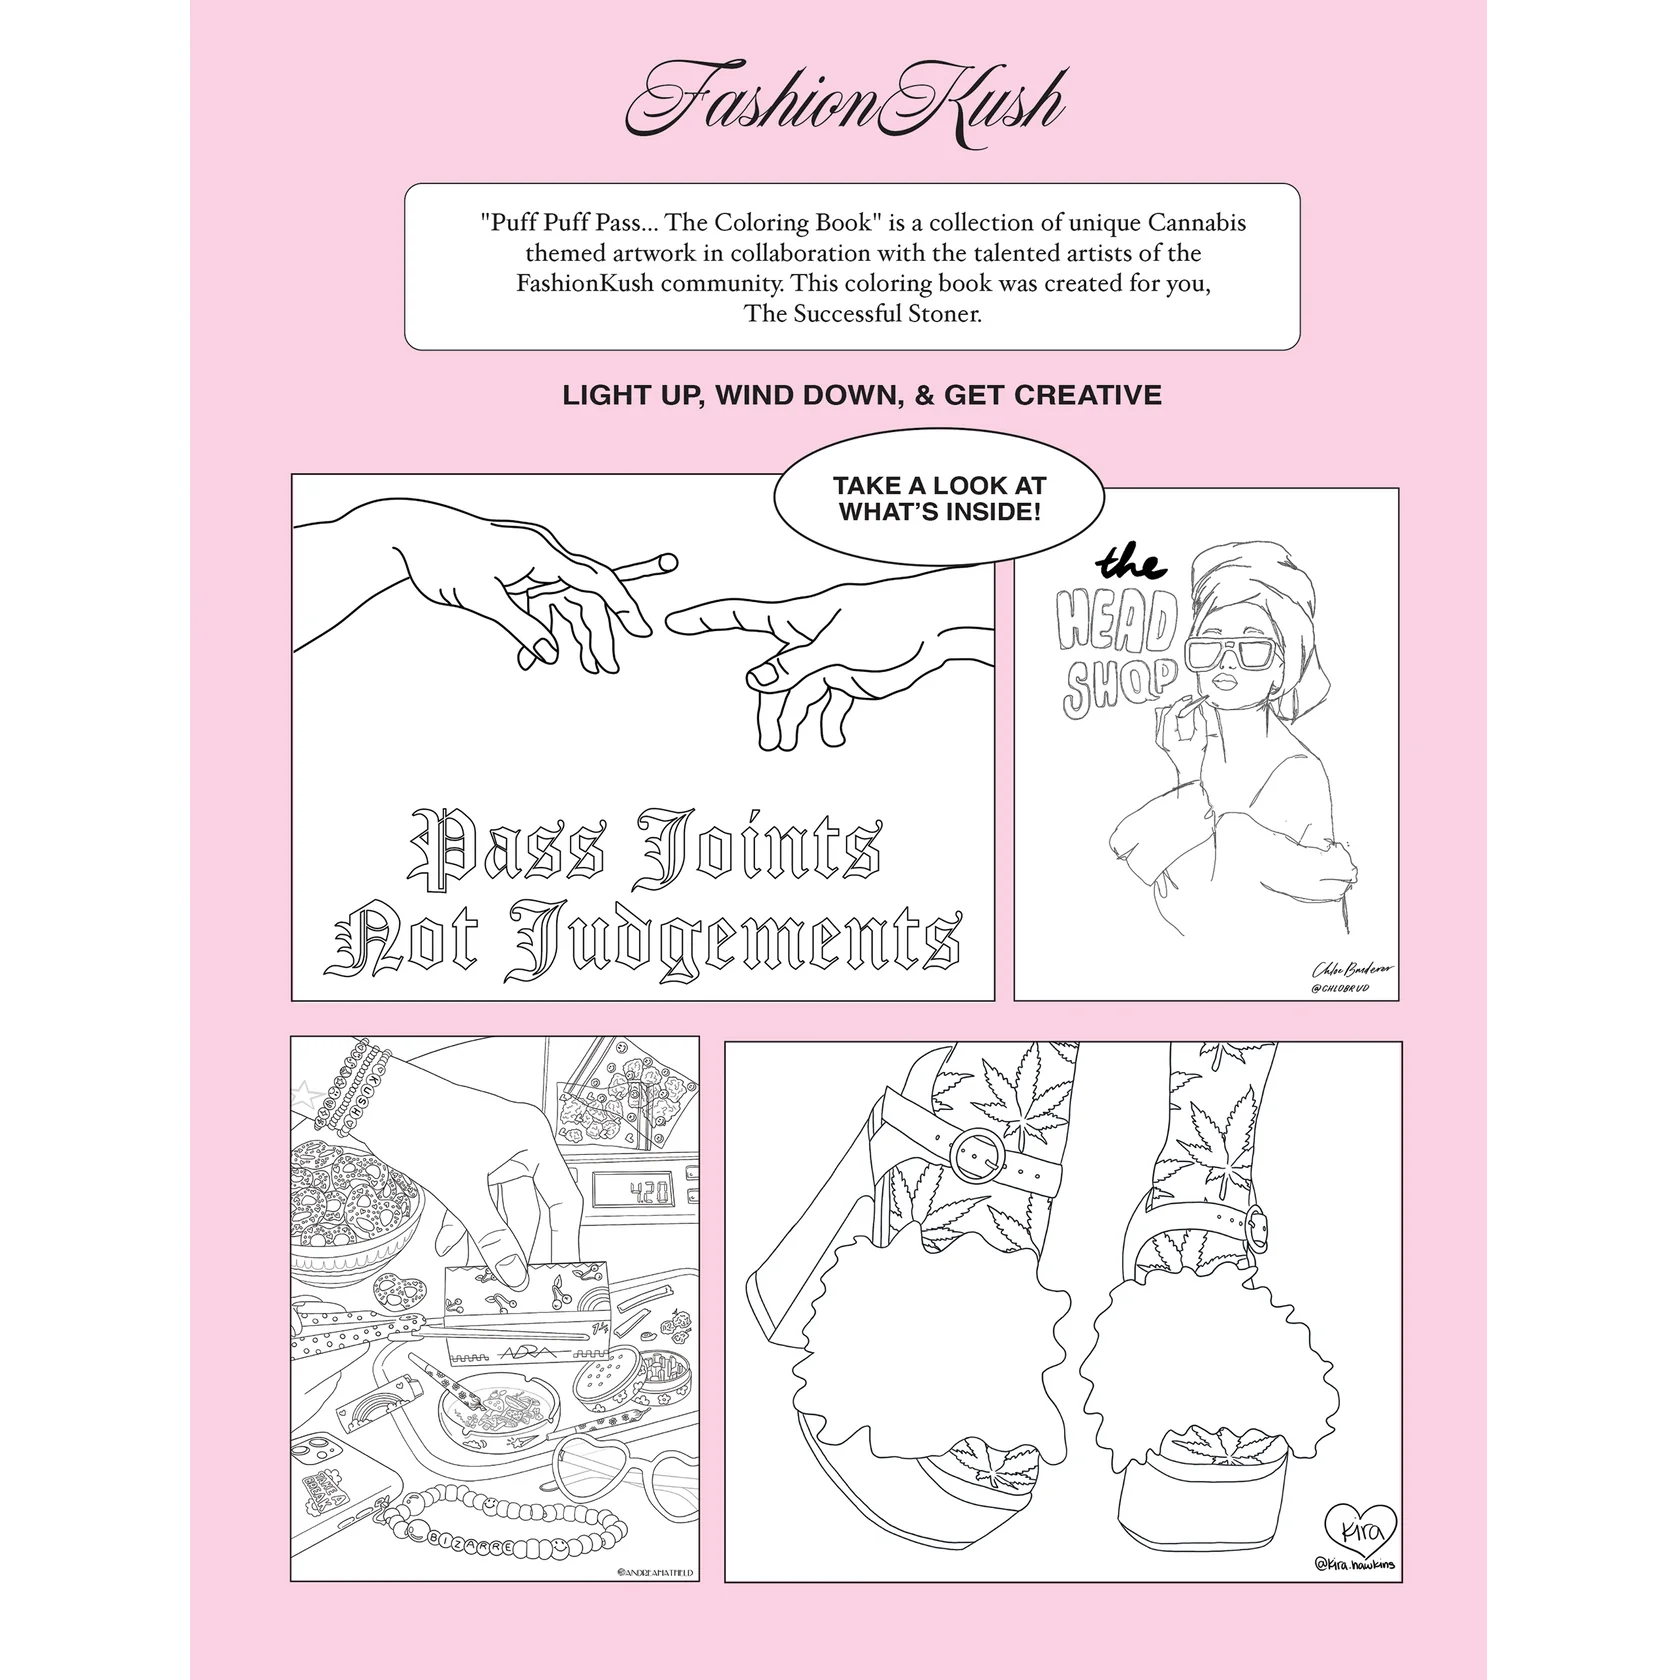 Stoner Coloring Page, Colouring Page for Adults Stoner Coloring Book for  Adults, Weed Stuff, Adult Coloring Book, Stoner Gift, Marijuana Art -   Denmark